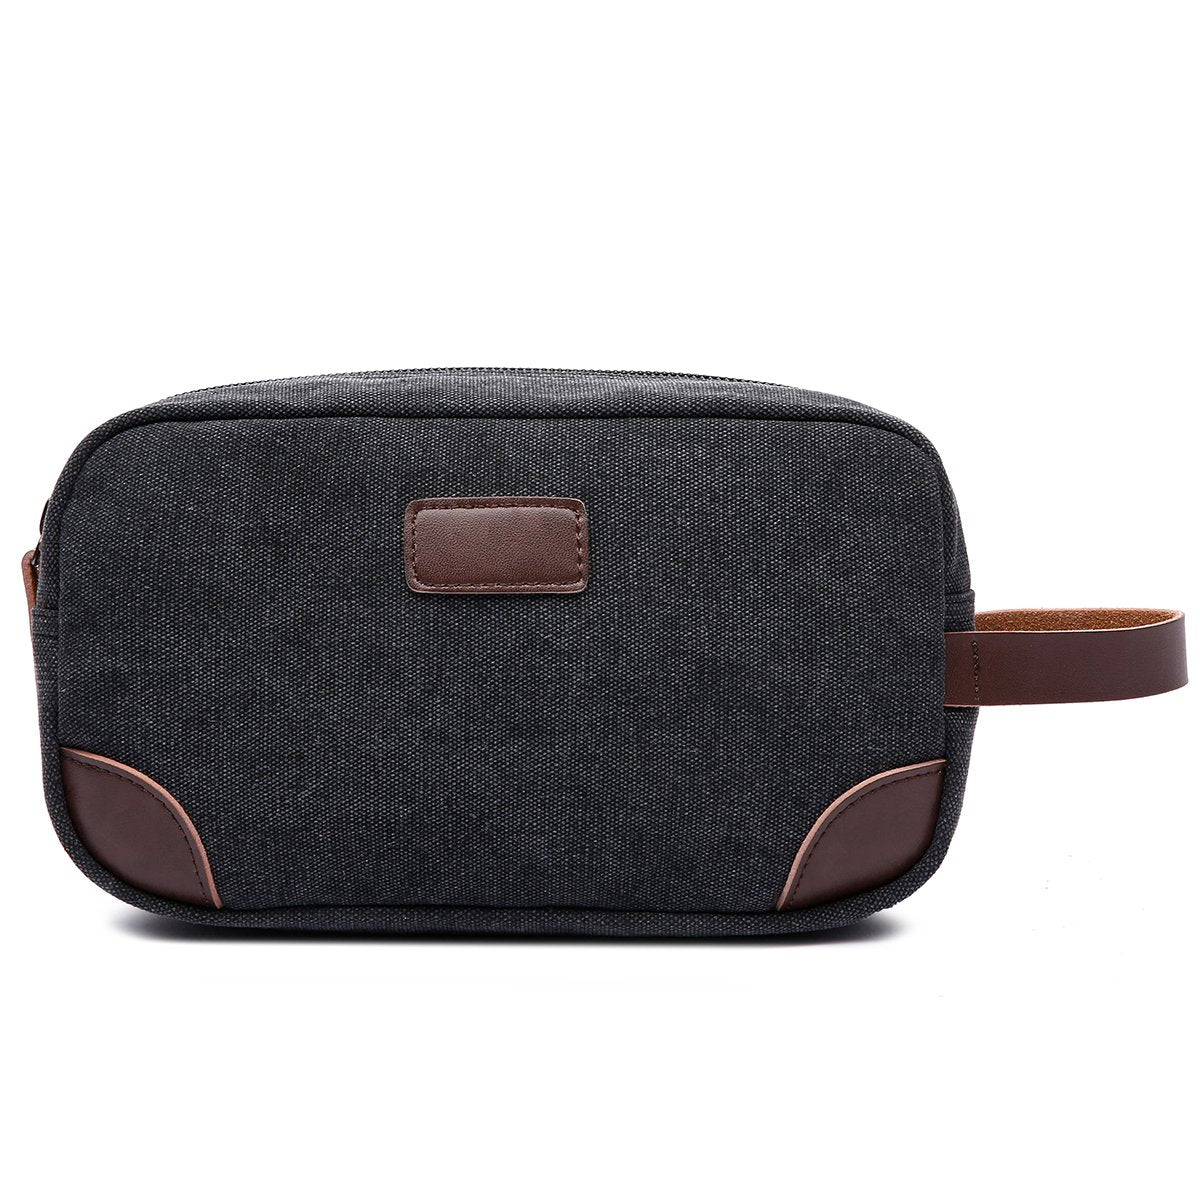 men's canvas and leather toiletry bag